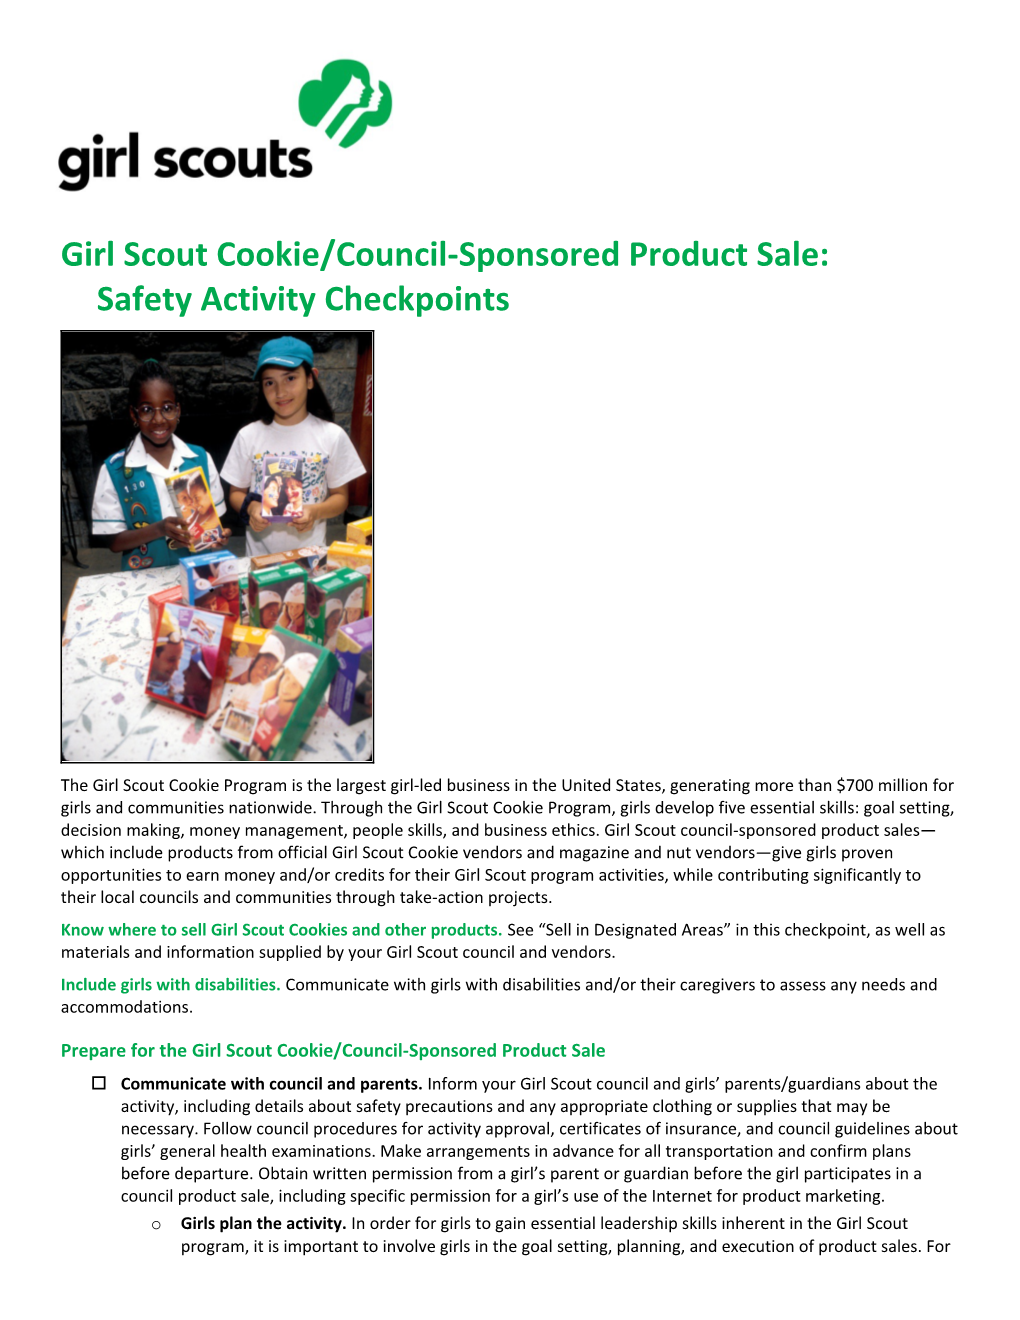 Girl Scout Cookie/Council-Sponsored Product Sale:Safety Activity Checkpoints